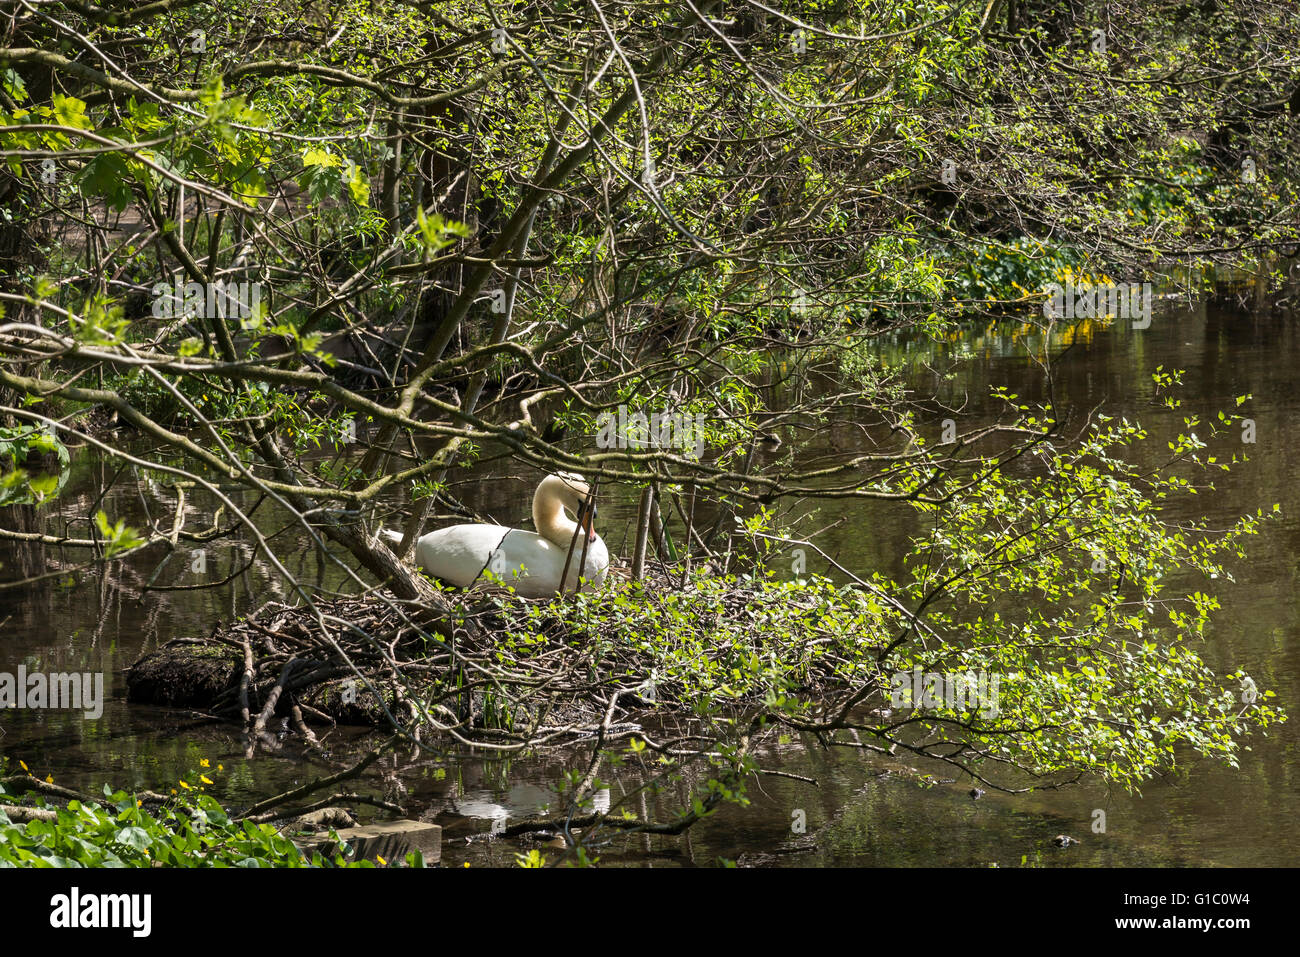 Swan sitting on a nest at the Keg pool in Etherow country park, Stockport, England. Stock Photo